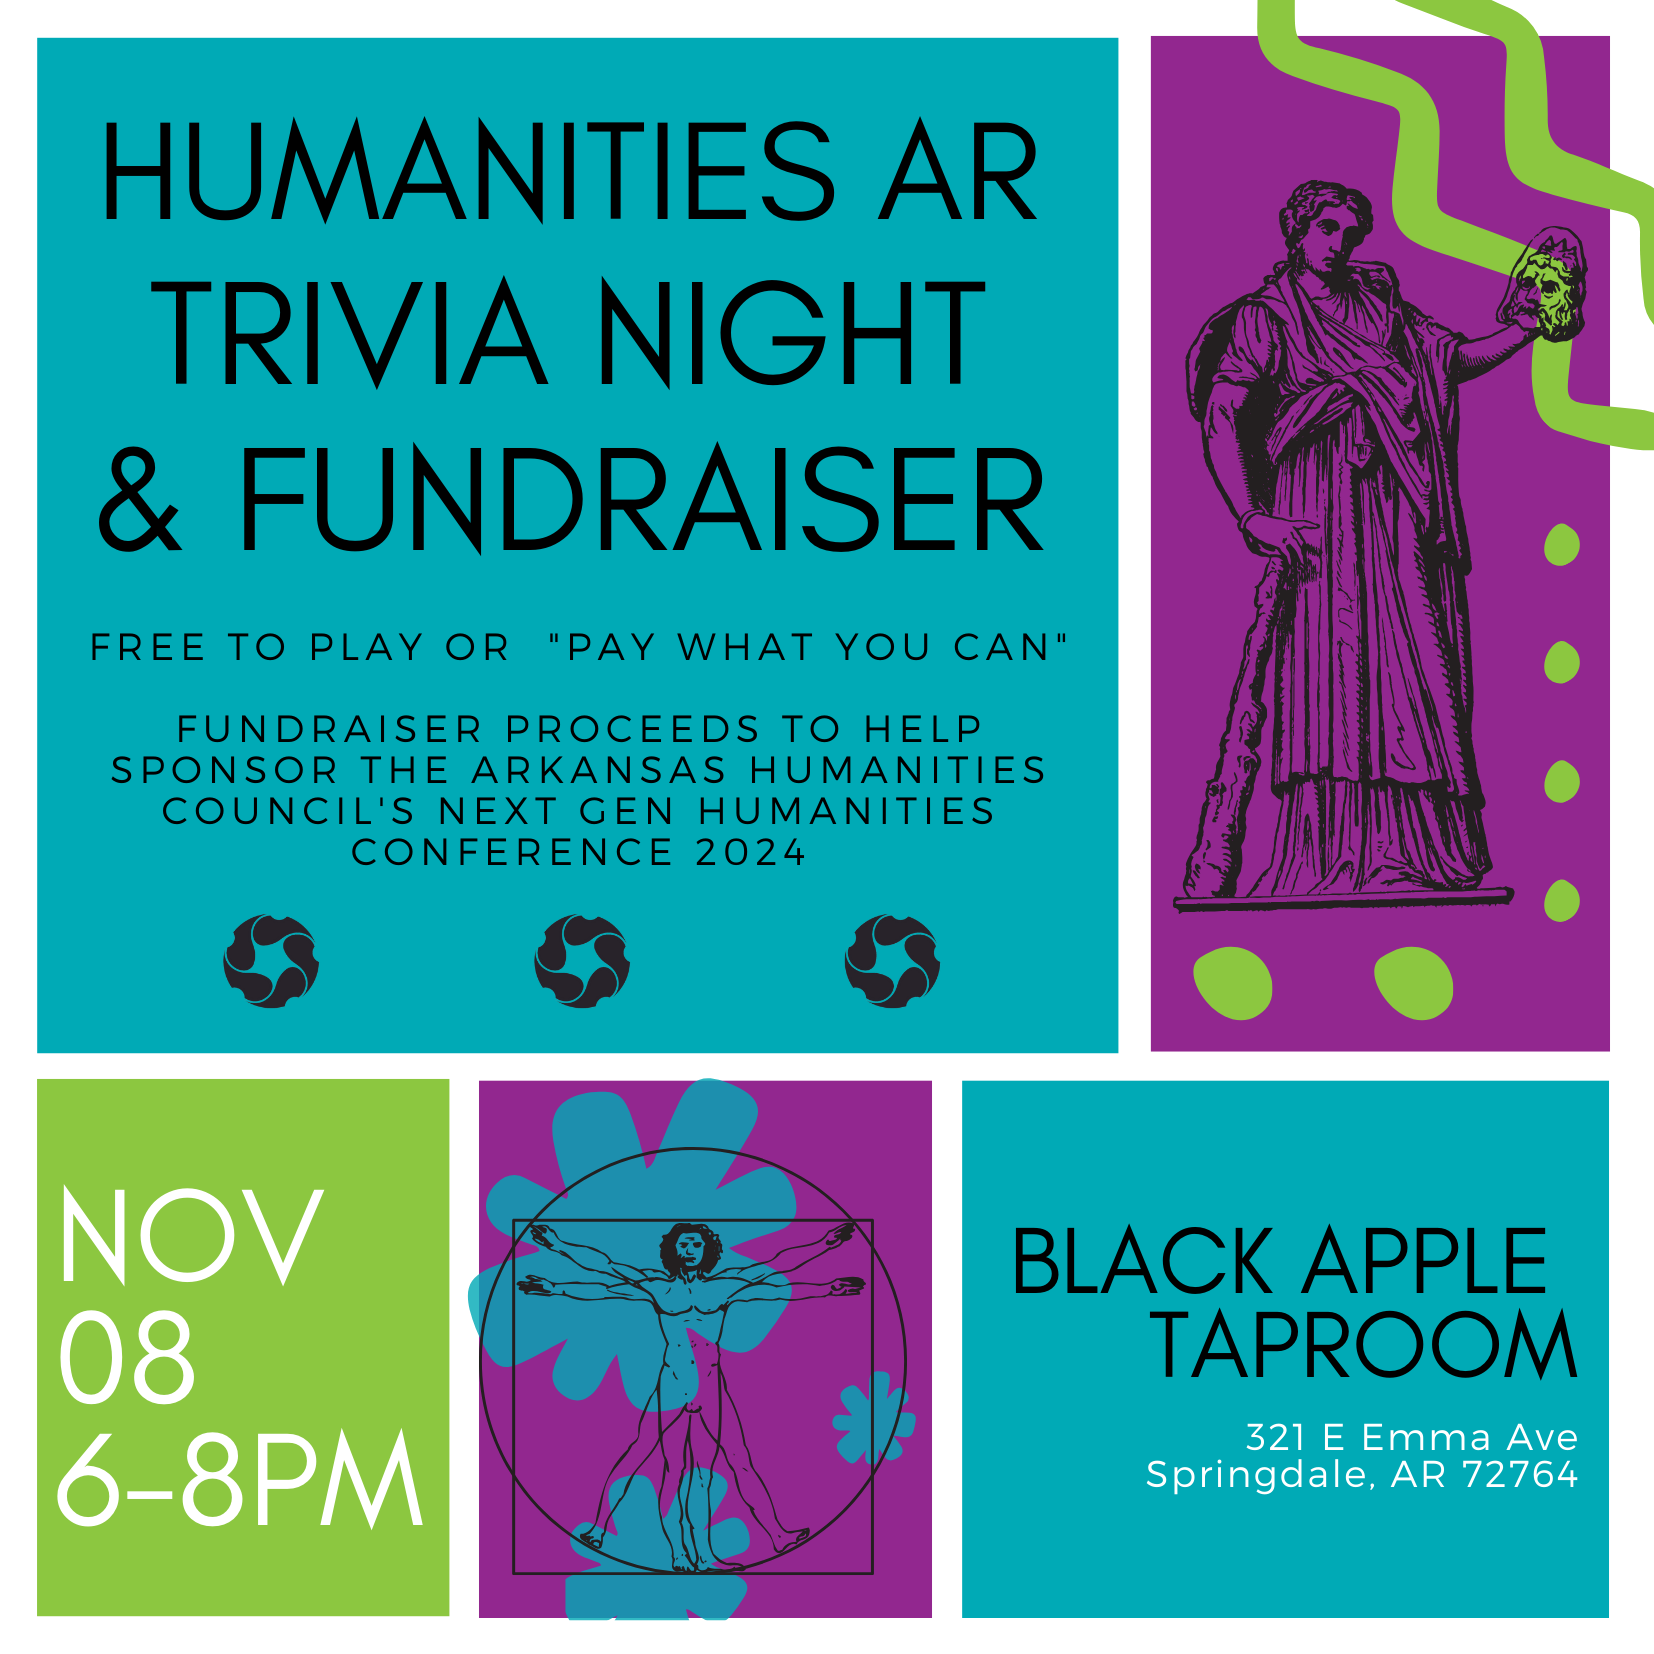 Humanities AR trivia night and fundraiser; free to play or pay what you can; Nov 08, 6-8pm, Black Apple Taproom; proceeds help sponsor the Next Gen Humanities Conference.